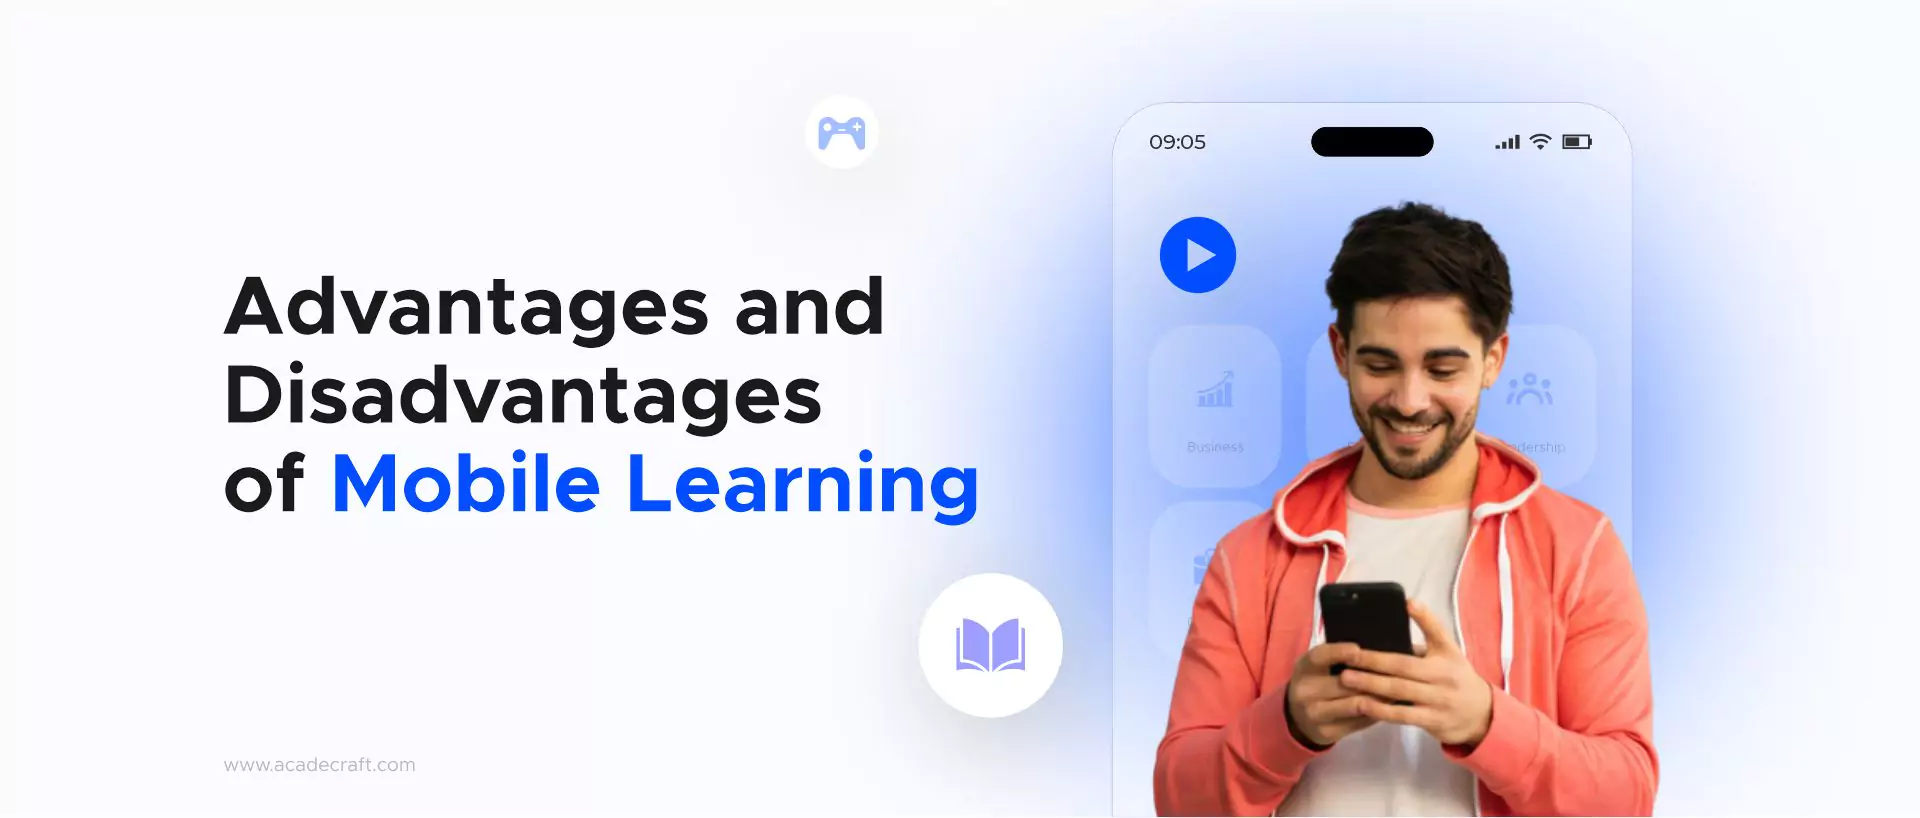 Advantages and Disadvantages of Mobile Learning